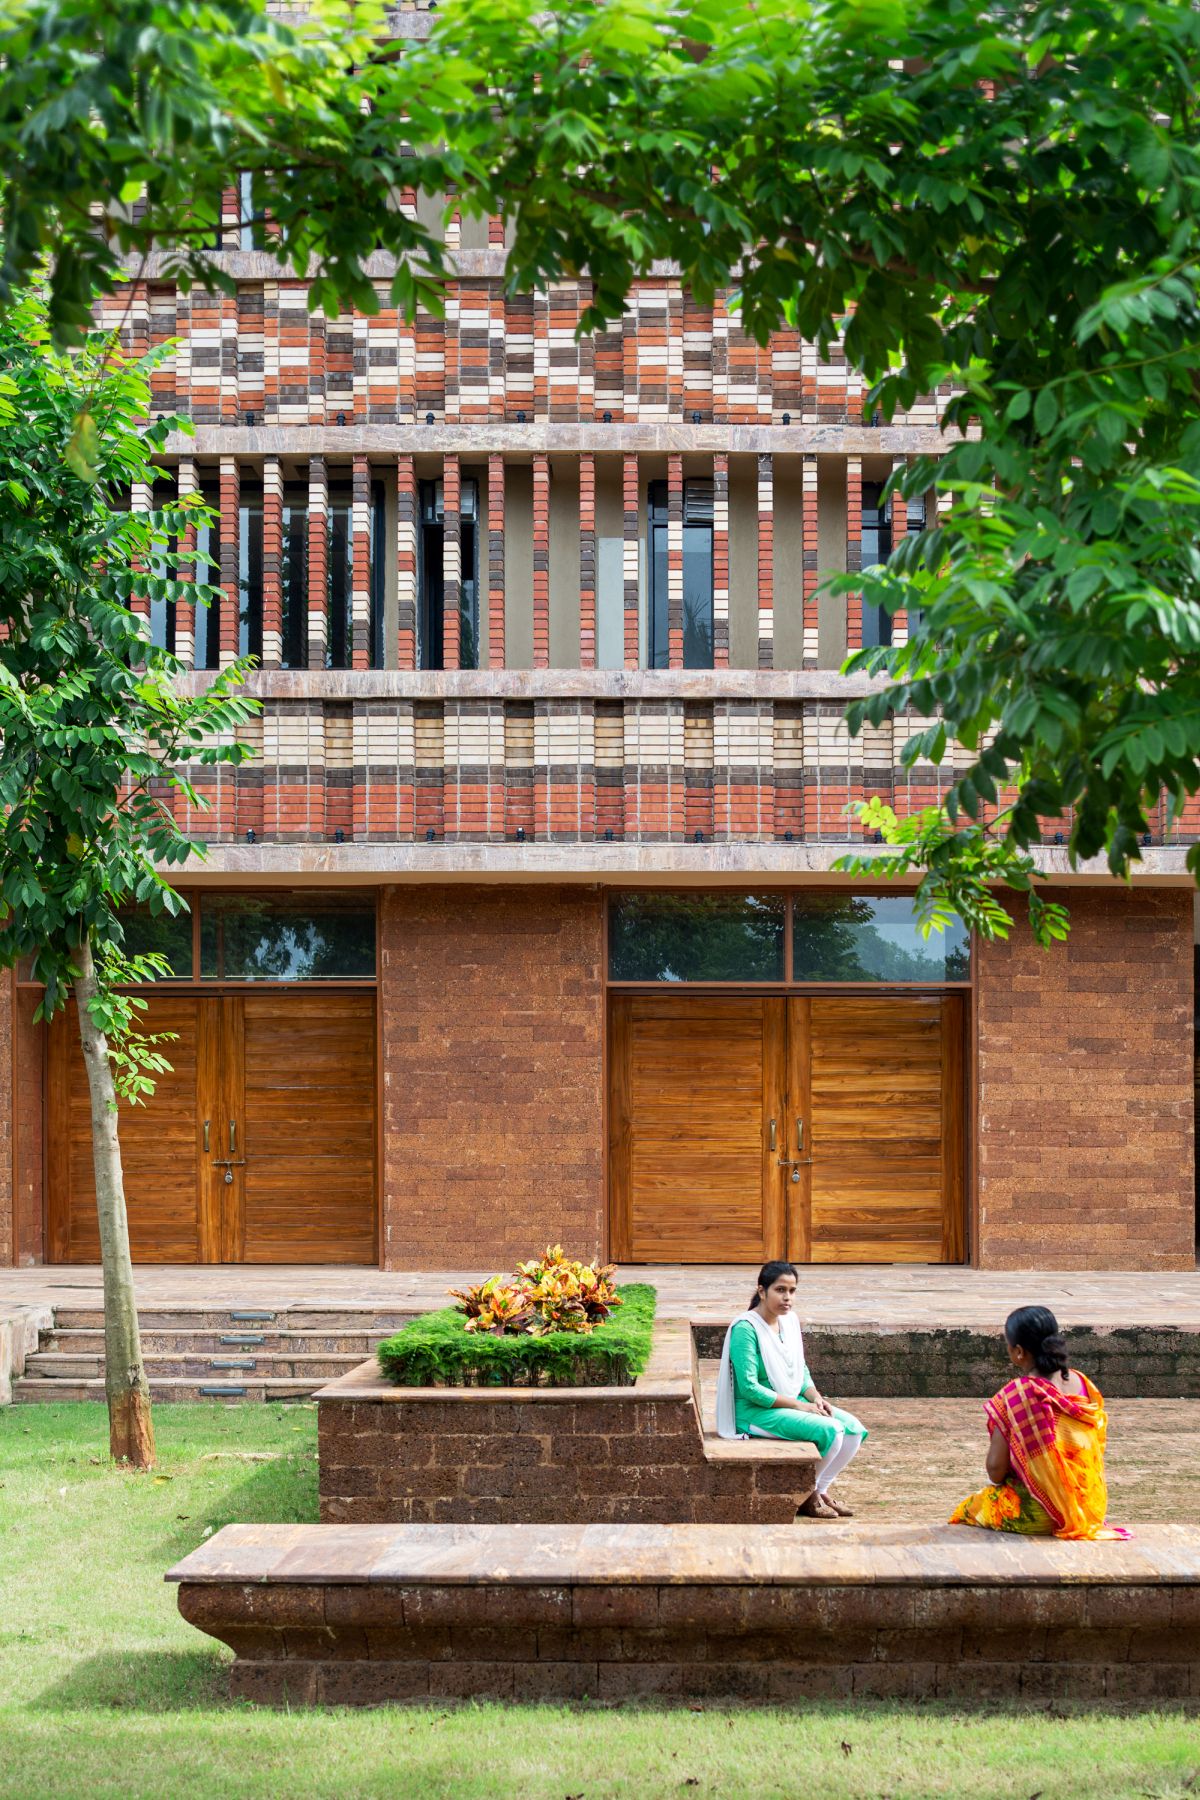 Krushi Bhawan | 150 Local Artisans Come Together to Craft a Civic Building in India, by Studio Lotus 6